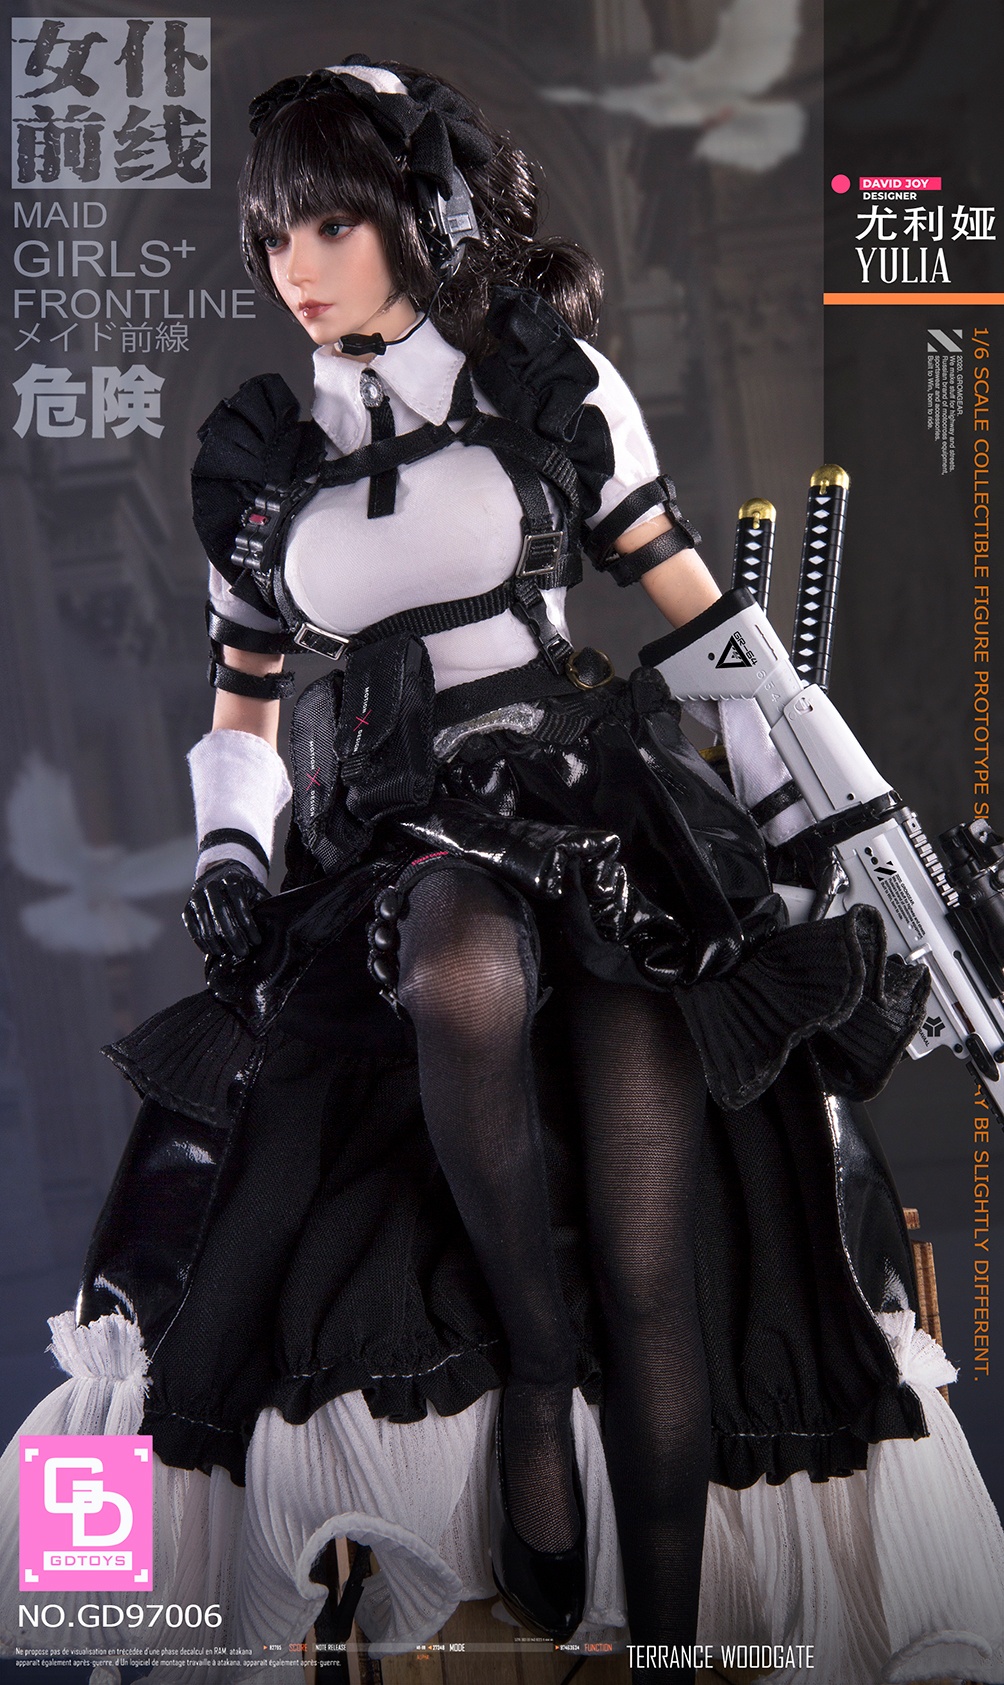 MaidGirls - NEW PRODUCT: GDTOYS: GD97006 1/6 Scale Maid Girls+ Frontline - YULIA 22563911